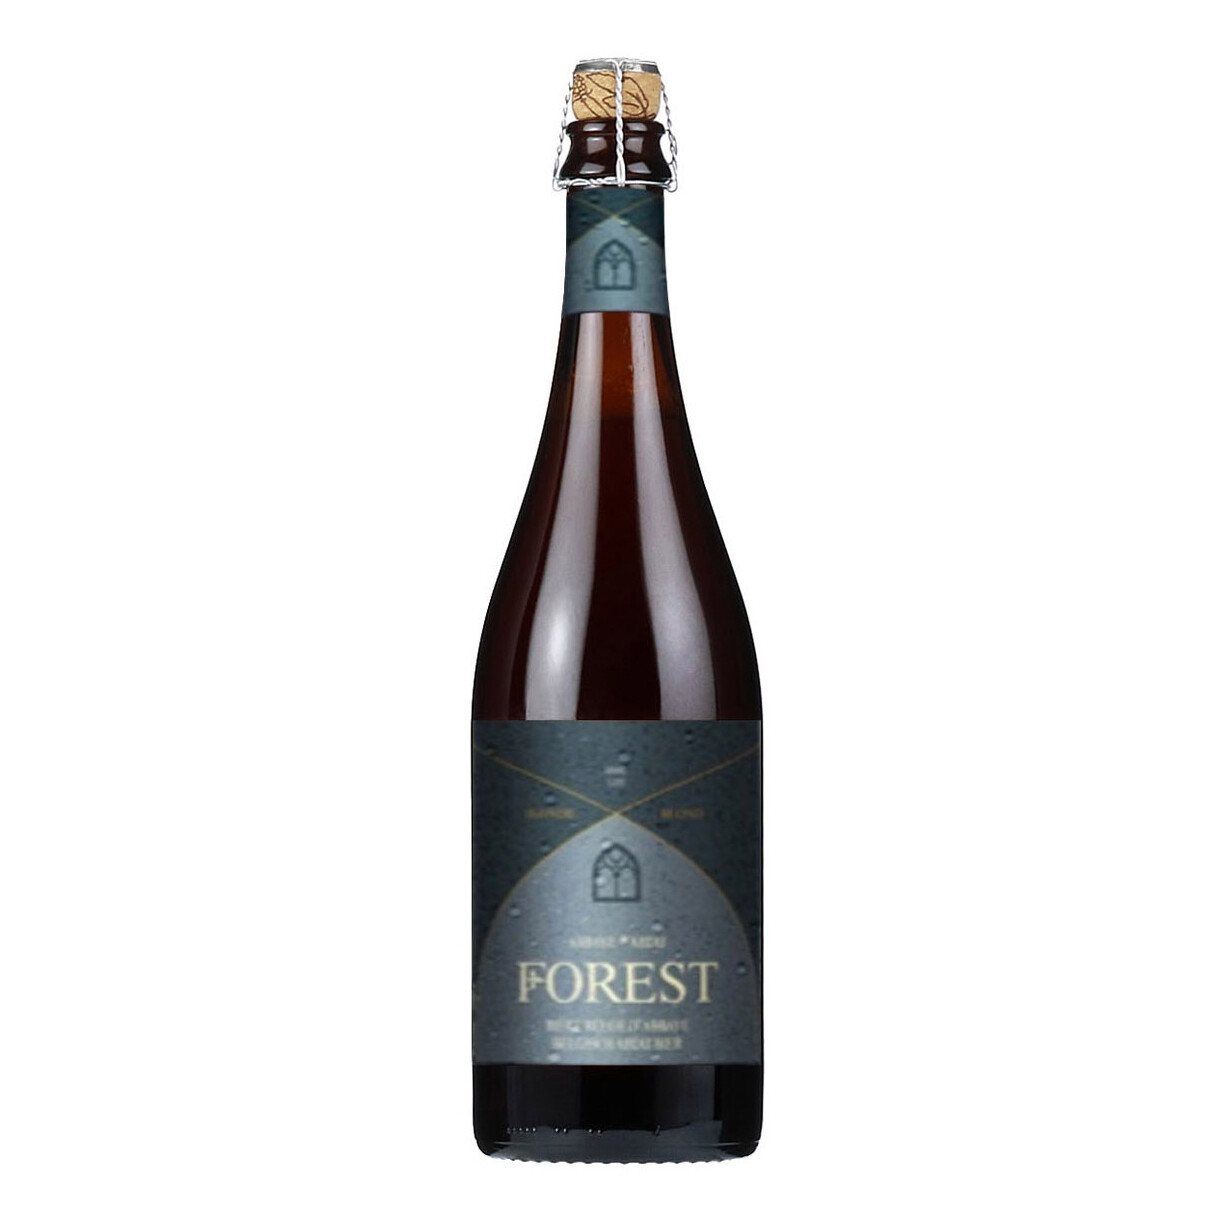 Abbaye de Forest Blond Beer LARGE 750ml